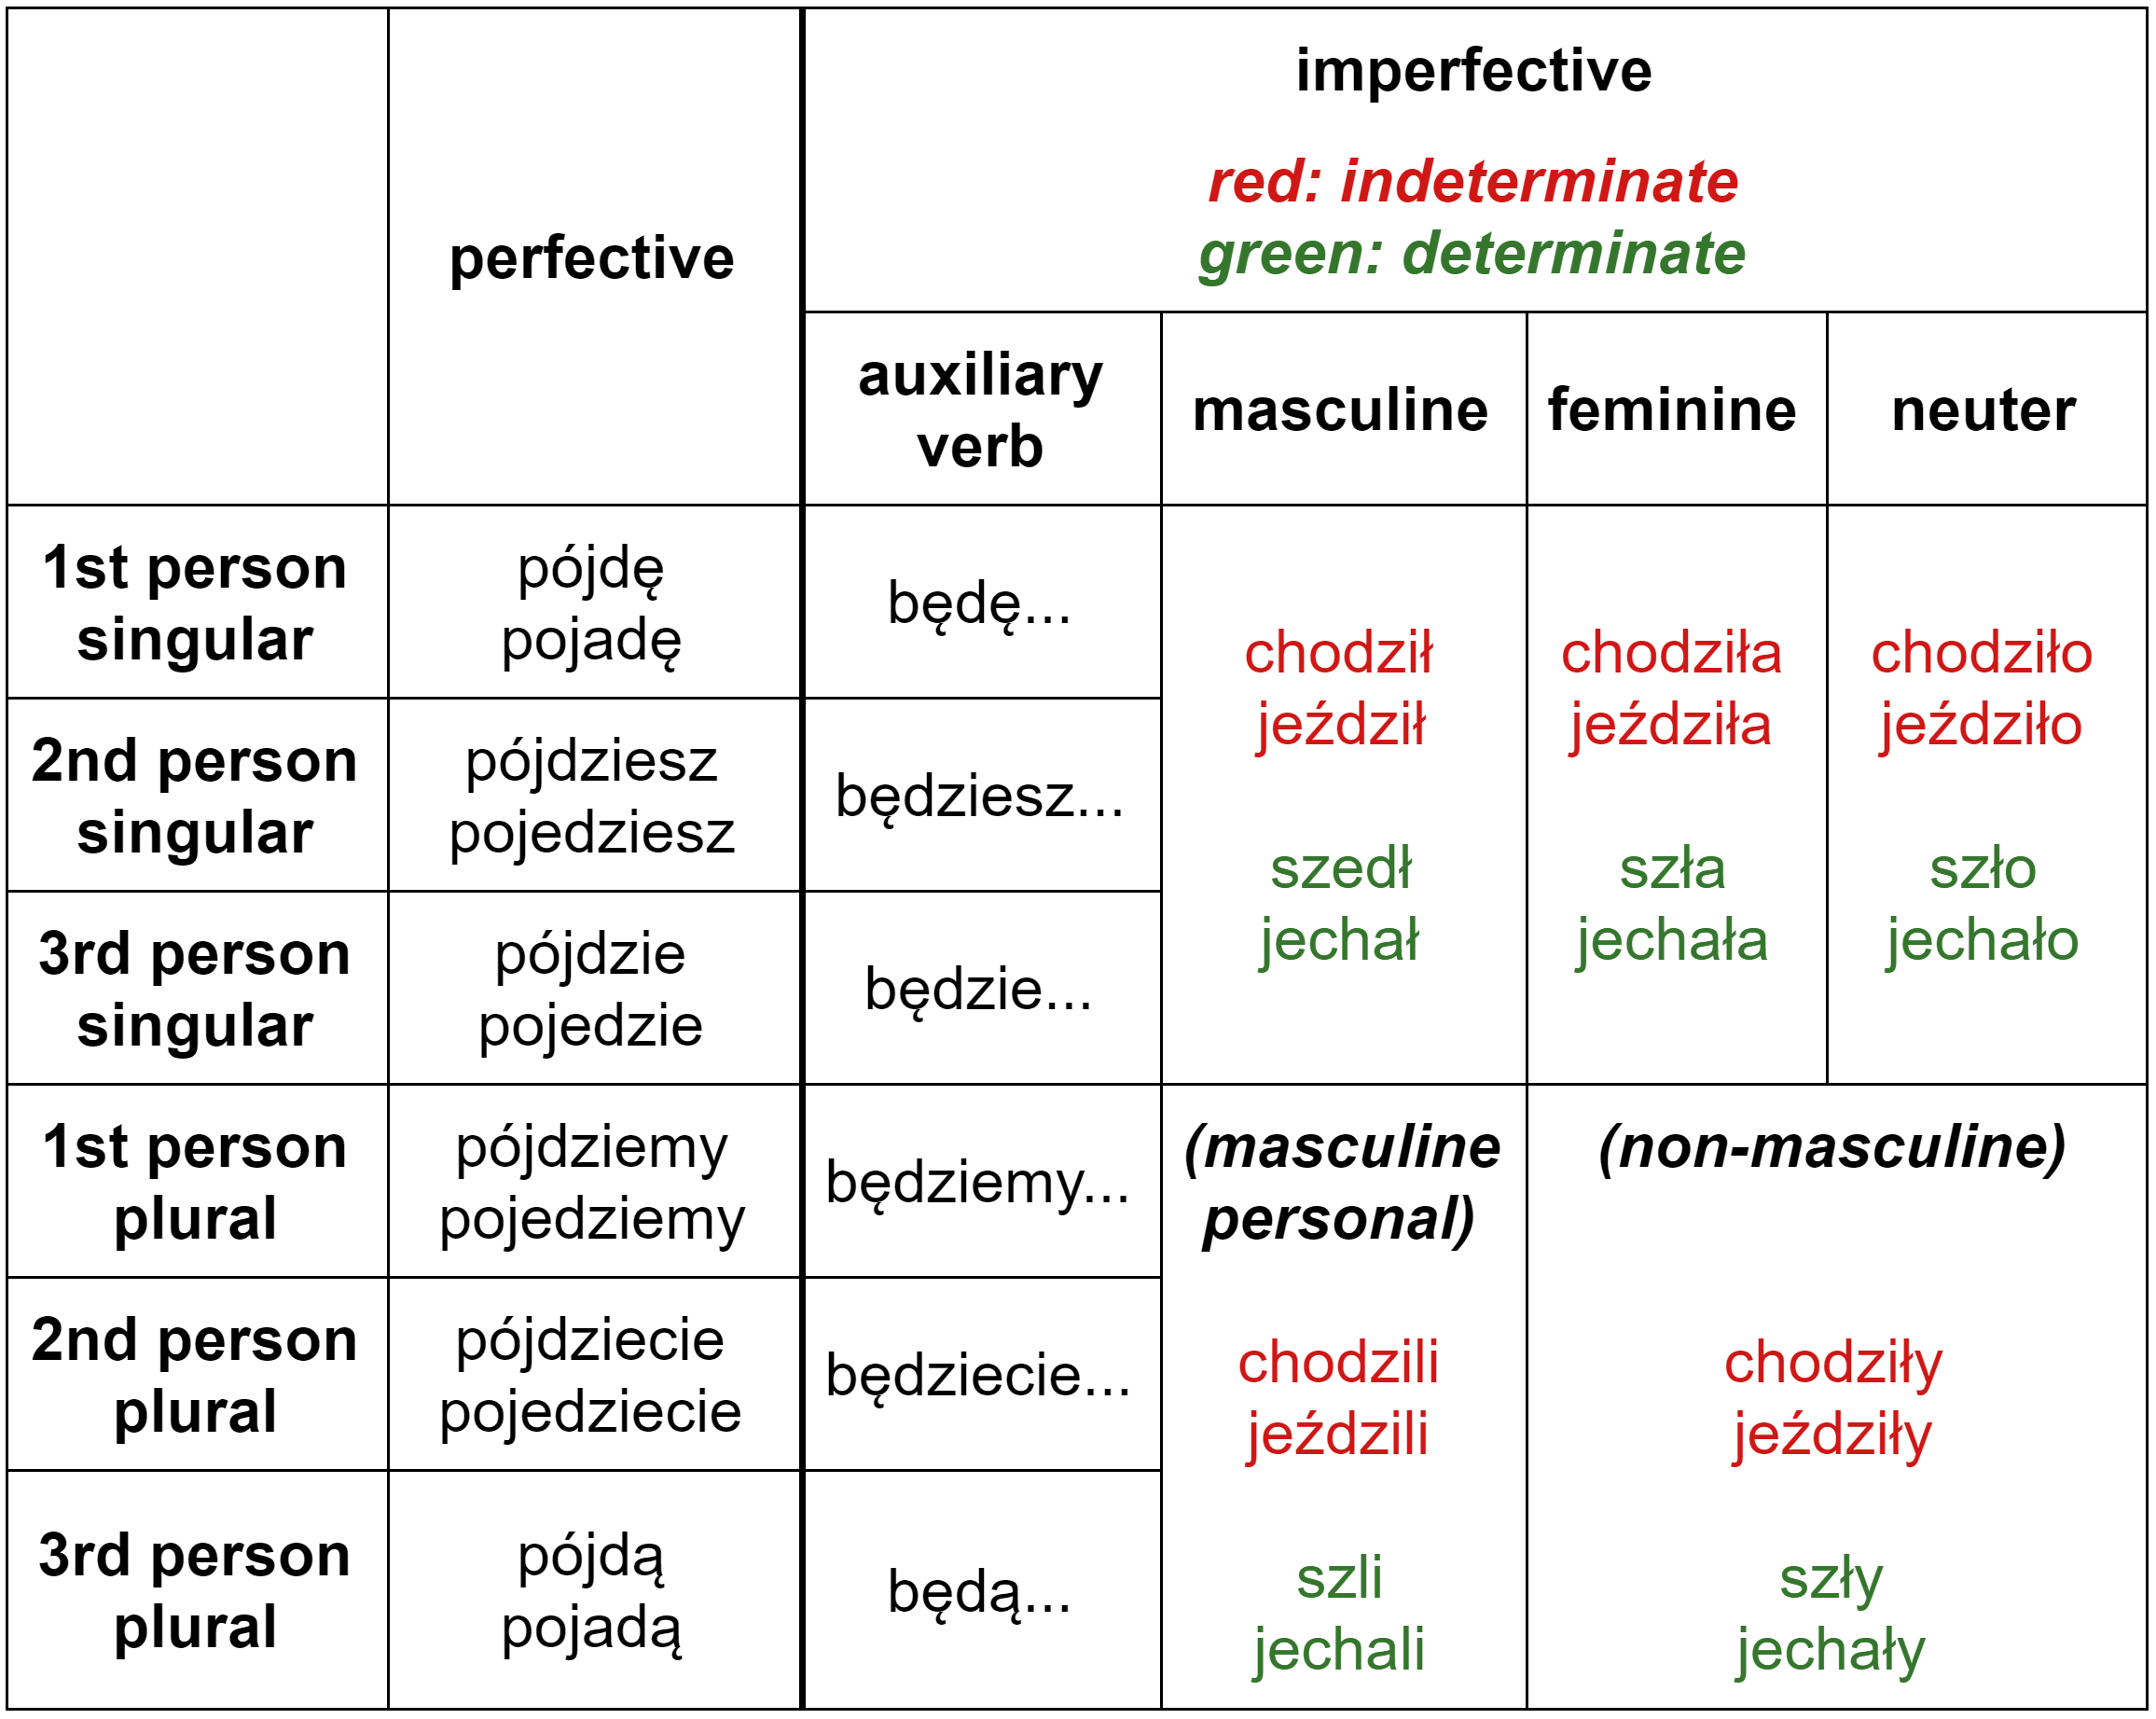 Conjugation of the Polish verbs of motion “iść” and “jechać” in the future tense – perfective and imperfective aspects